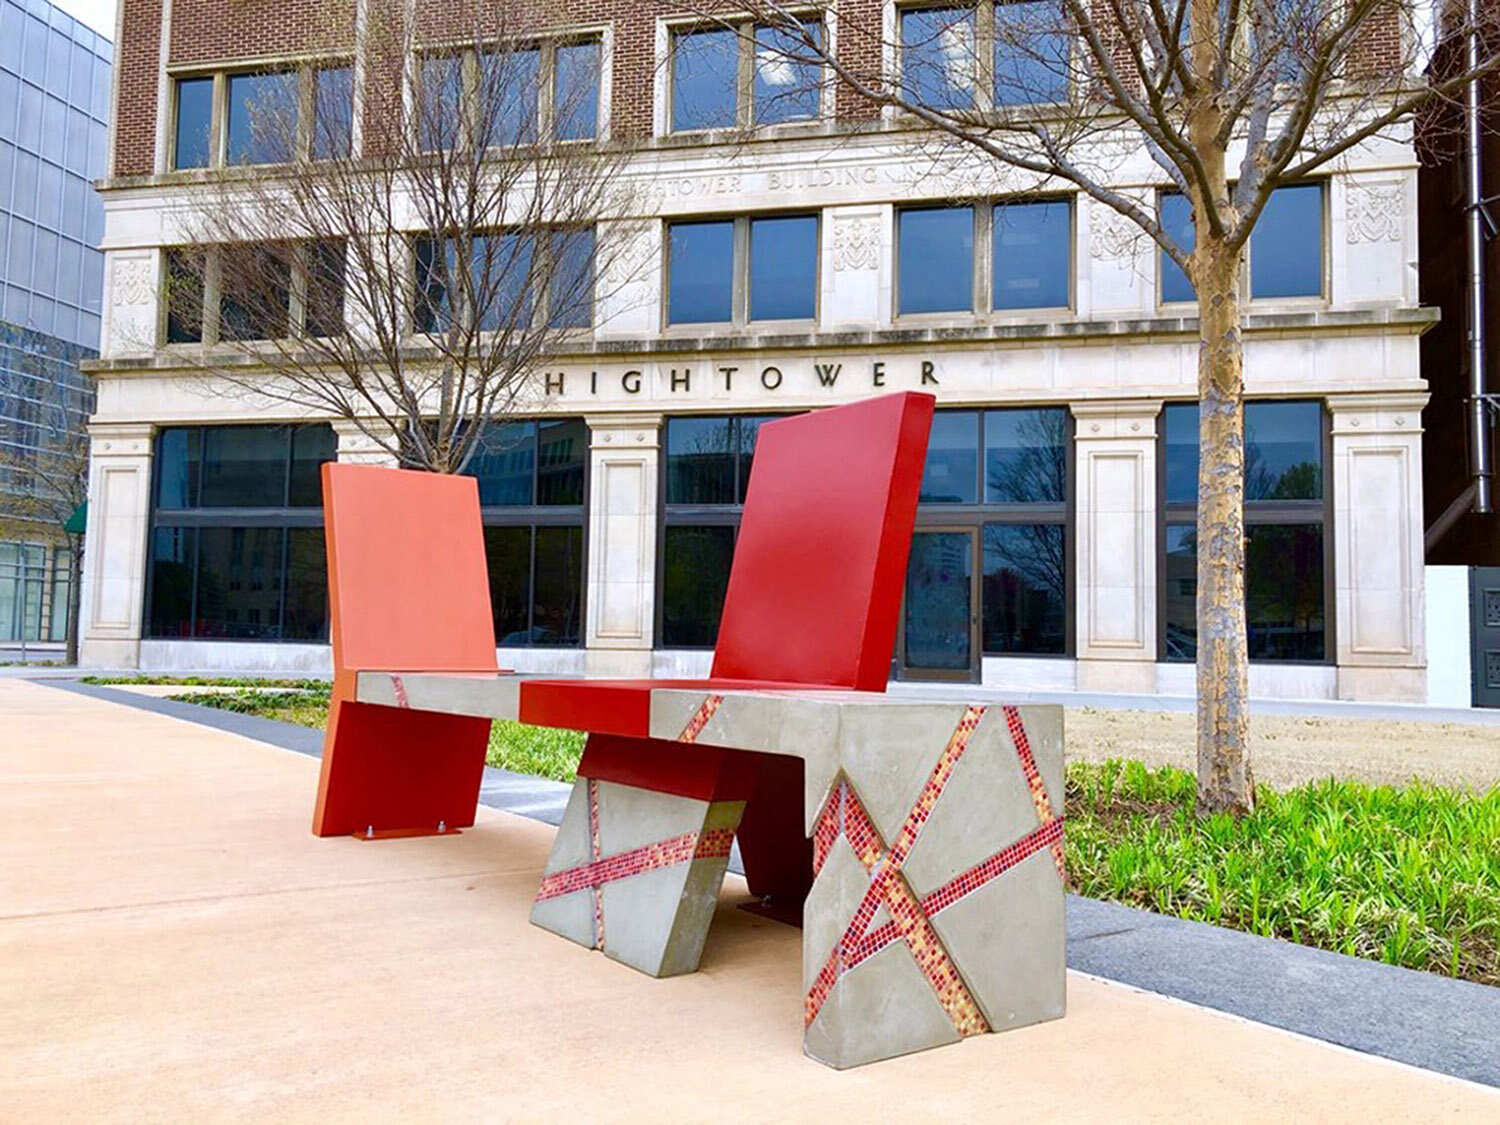 Beatriz Mayorca's public install chairs made of mosaic tiles and metal acting as public seating